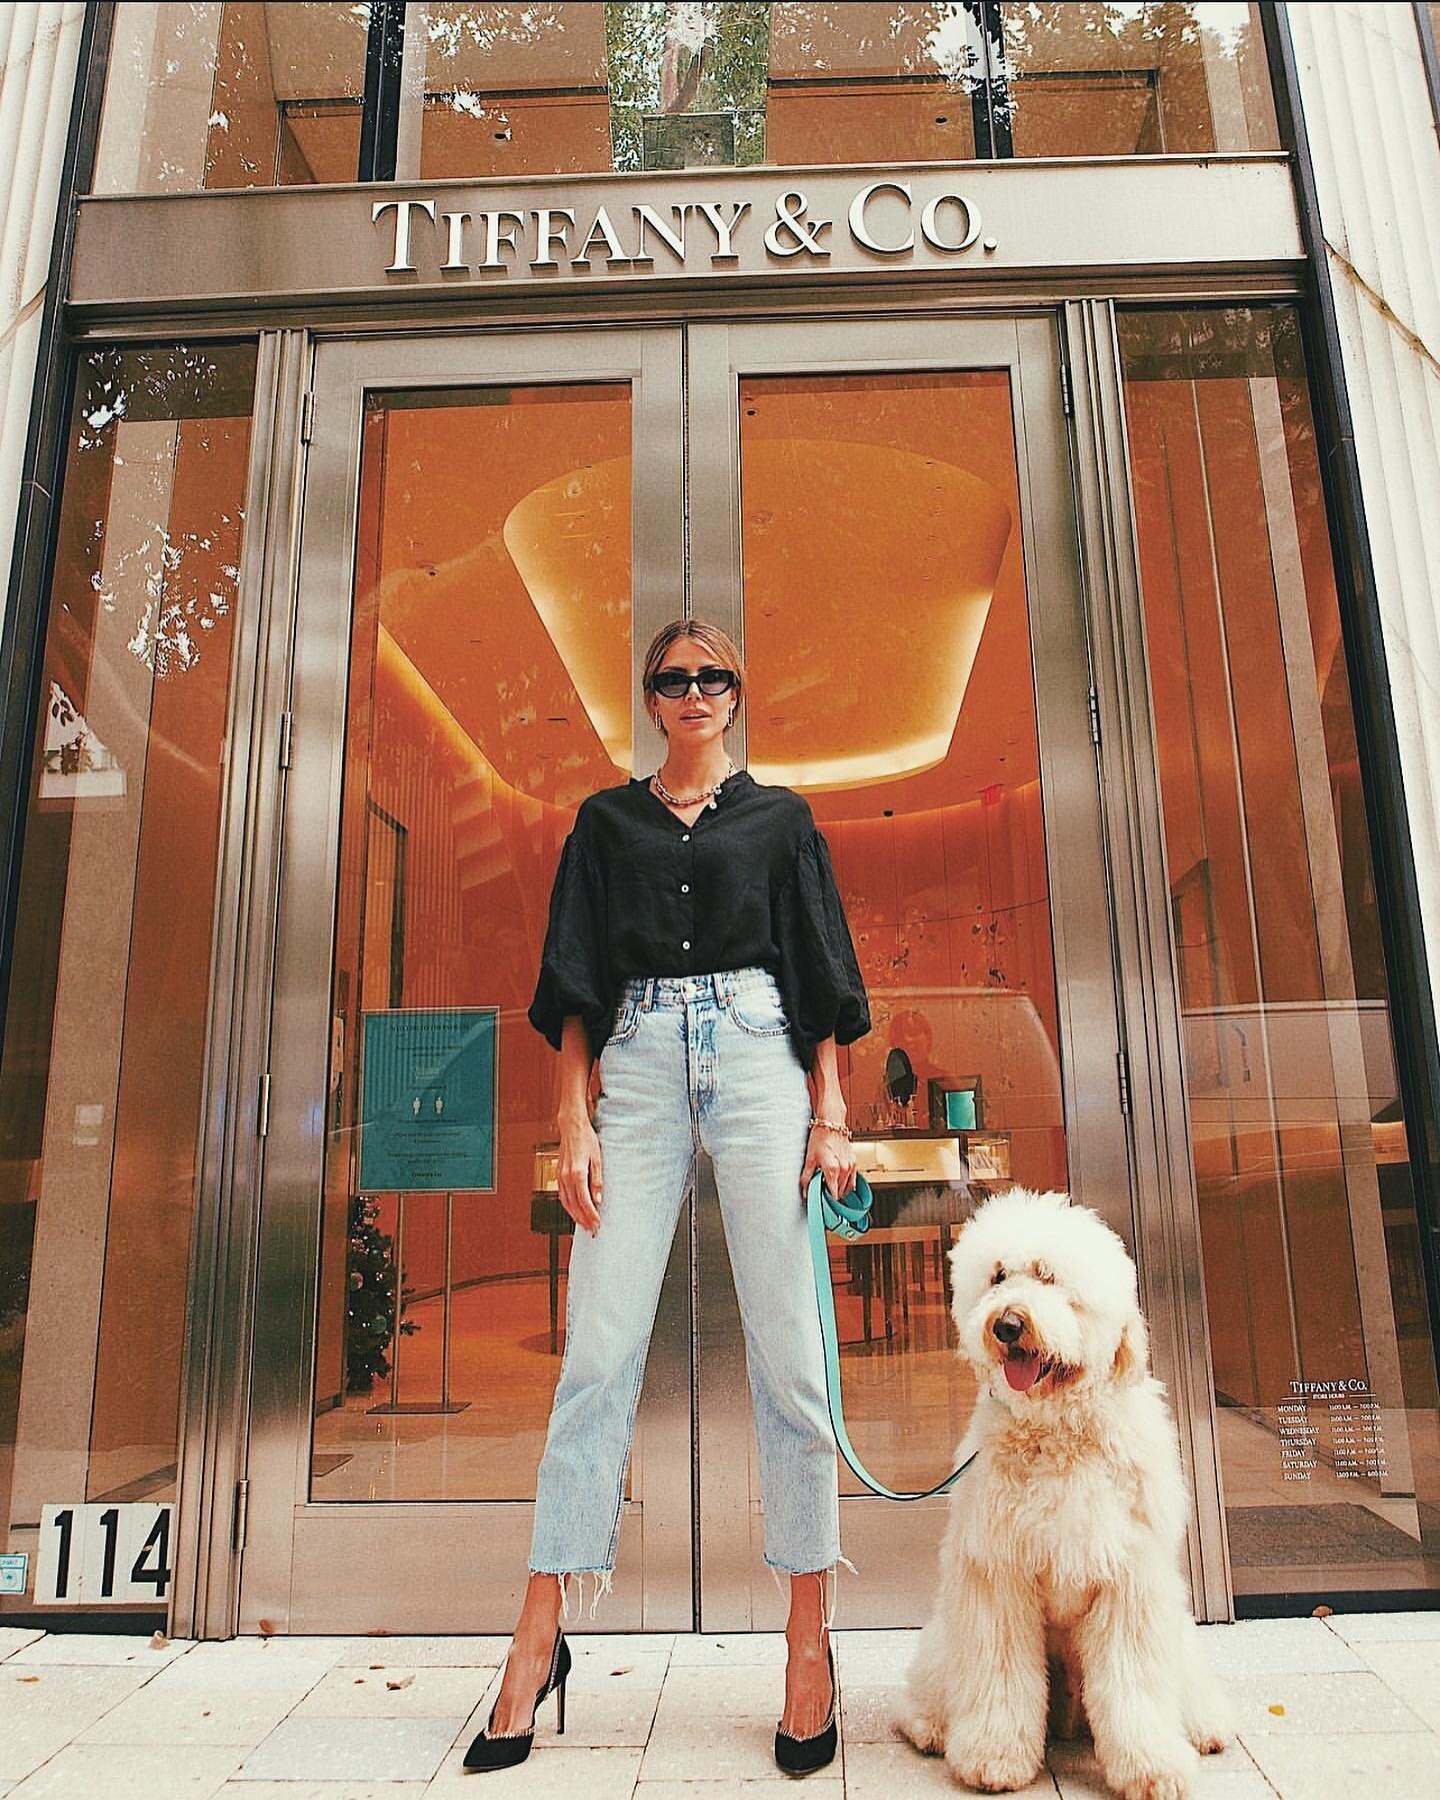 Not much we love more than dogs and Tiffany 🐶 Check out #tiffanypartner @marthagraeff &rsquo;s favorite picks from&nbsp;@tiffanyandco&nbsp;❤️&nbsp;

Nada inspira m&aacute;s amor que perritos y Tiffany 🐶 Te invitamos a visitar la selecci&oacute;n de